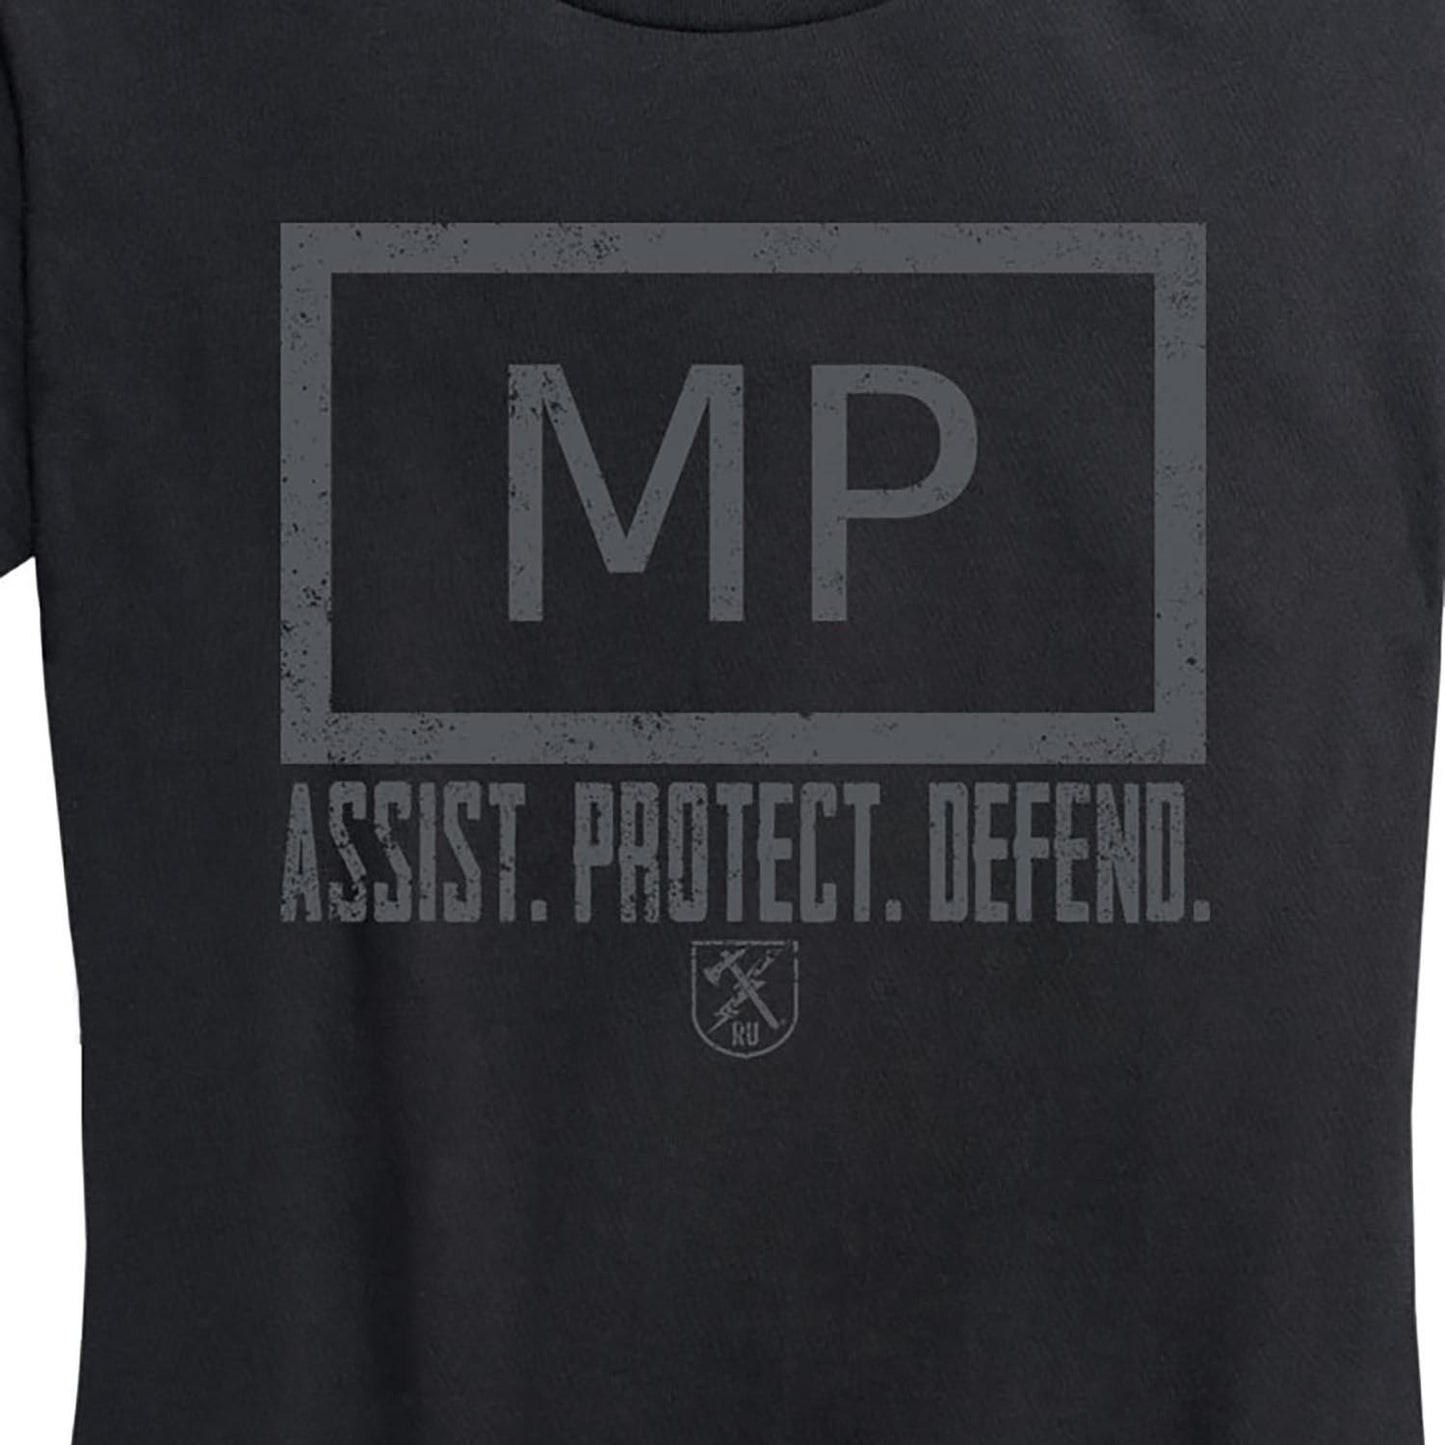 Women's Military Police "Assist, Protect, Defend" Tee